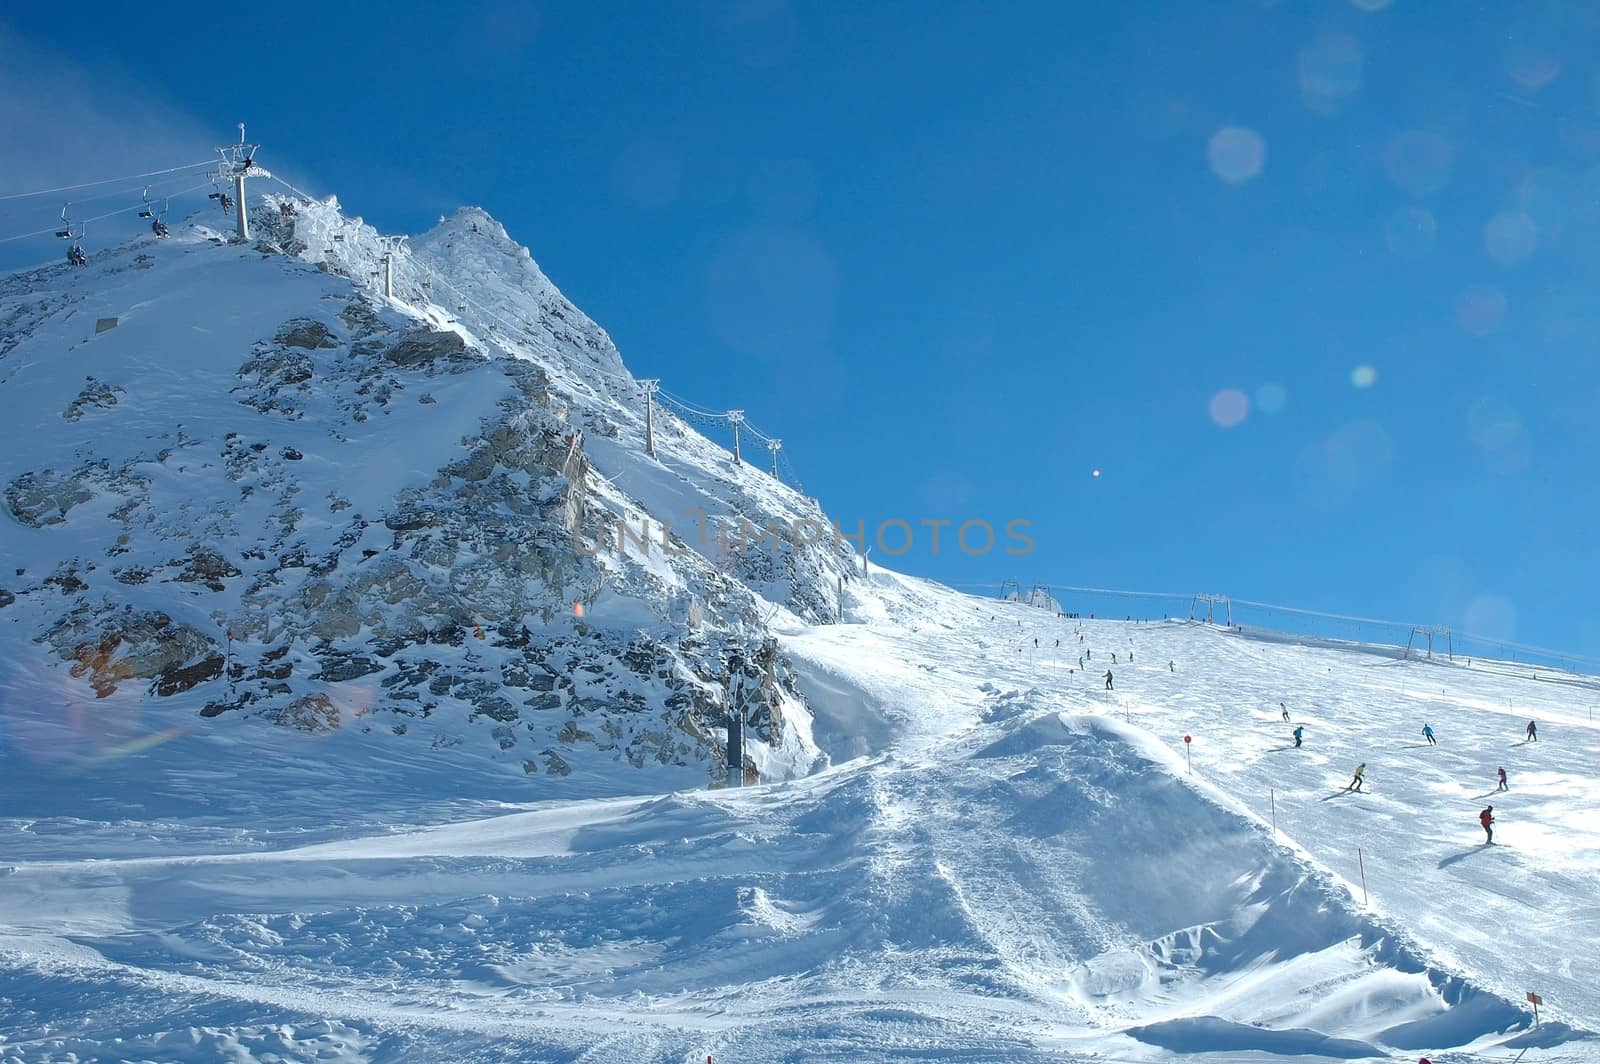 Ski slope, lift and skiers on Hintertux glacier in Alps nearby Zillertal valley in Austria